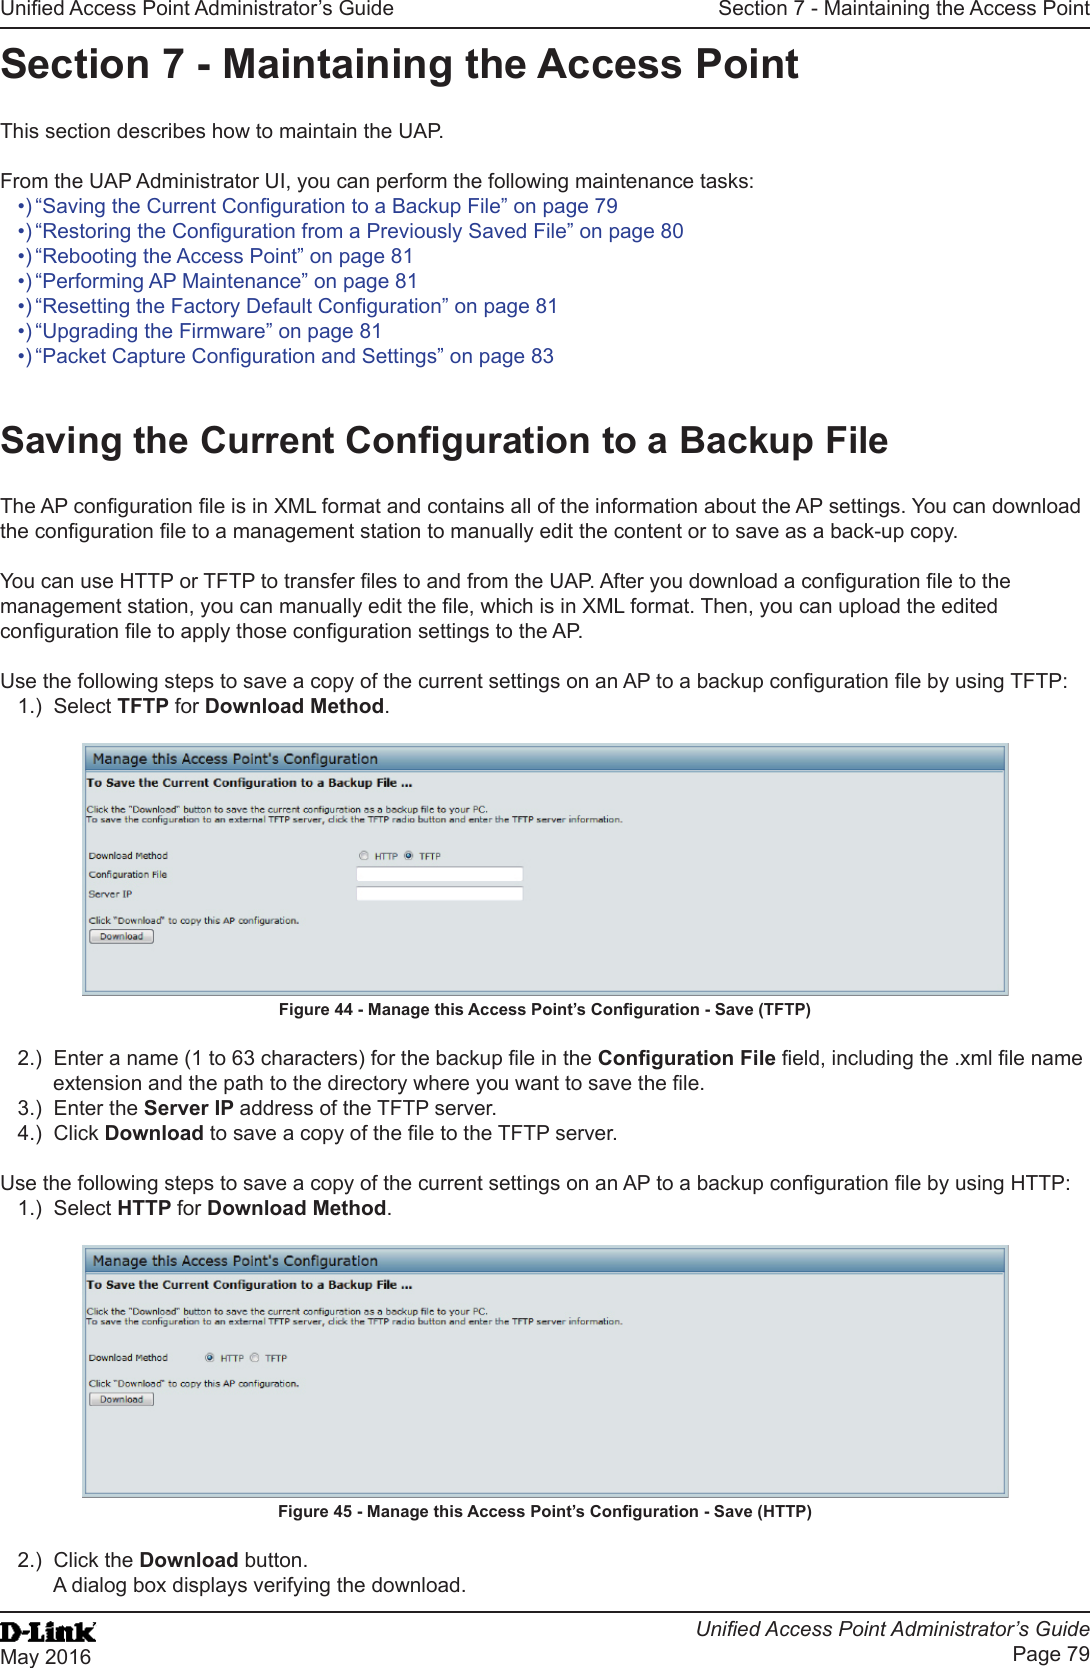 Unied Access Point Administrator’s GuideUnied Access Point Administrator’s GuidePage 79May 2016Section 7 - Maintaining the Access PointSection 7 - Maintaining the Access PointThis section describes how to maintain the UAP.From the UAP Administrator UI, you can perform the following maintenance tasks:•) “Saving the Current Conguration to a Backup File” on page 79•) “Restoring the Conguration from a Previously Saved File” on page 80•) “Rebooting the Access Point” on page 81•) “Performing AP Maintenance” on page 81•) “Resetting the Factory Default Conguration” on page 81•) “Upgrading the Firmware” on page 81•) “Packet Capture Conguration and Settings” on page 83Saving the Current Conguration to a Backup FileThe AP conguration le is in XML format and contains all of the information about the AP settings. You can download the conguration le to a management station to manually edit the content or to save as a back-up copy. You can use HTTP or TFTP to transfer les to and from the UAP. After you download a conguration le to the management station, you can manually edit the le, which is in XML format. Then, you can upload the edited conguration le to apply those conguration settings to the AP.Use the following steps to save a copy of the current settings on an AP to a backup conguration le by using TFTP:1.)  Select TFTP for Download Method.Figure 44 - Manage this Access Point’s Conguration - Save (TFTP)2.)  Enter a name (1 to 63 characters) for the backup le in the Conguration File eld, including the .xml le name extension and the path to the directory where you want to save the le.3.)  Enter the Server IP address of the TFTP server.4.)  Click Download to save a copy of the le to the TFTP server.Use the following steps to save a copy of the current settings on an AP to a backup conguration le by using HTTP:1.)  Select HTTP for Download Method.Figure 45 - Manage this Access Point’s Conguration - Save (HTTP)2.)  Click the Download button.A dialog box displays verifying the download.